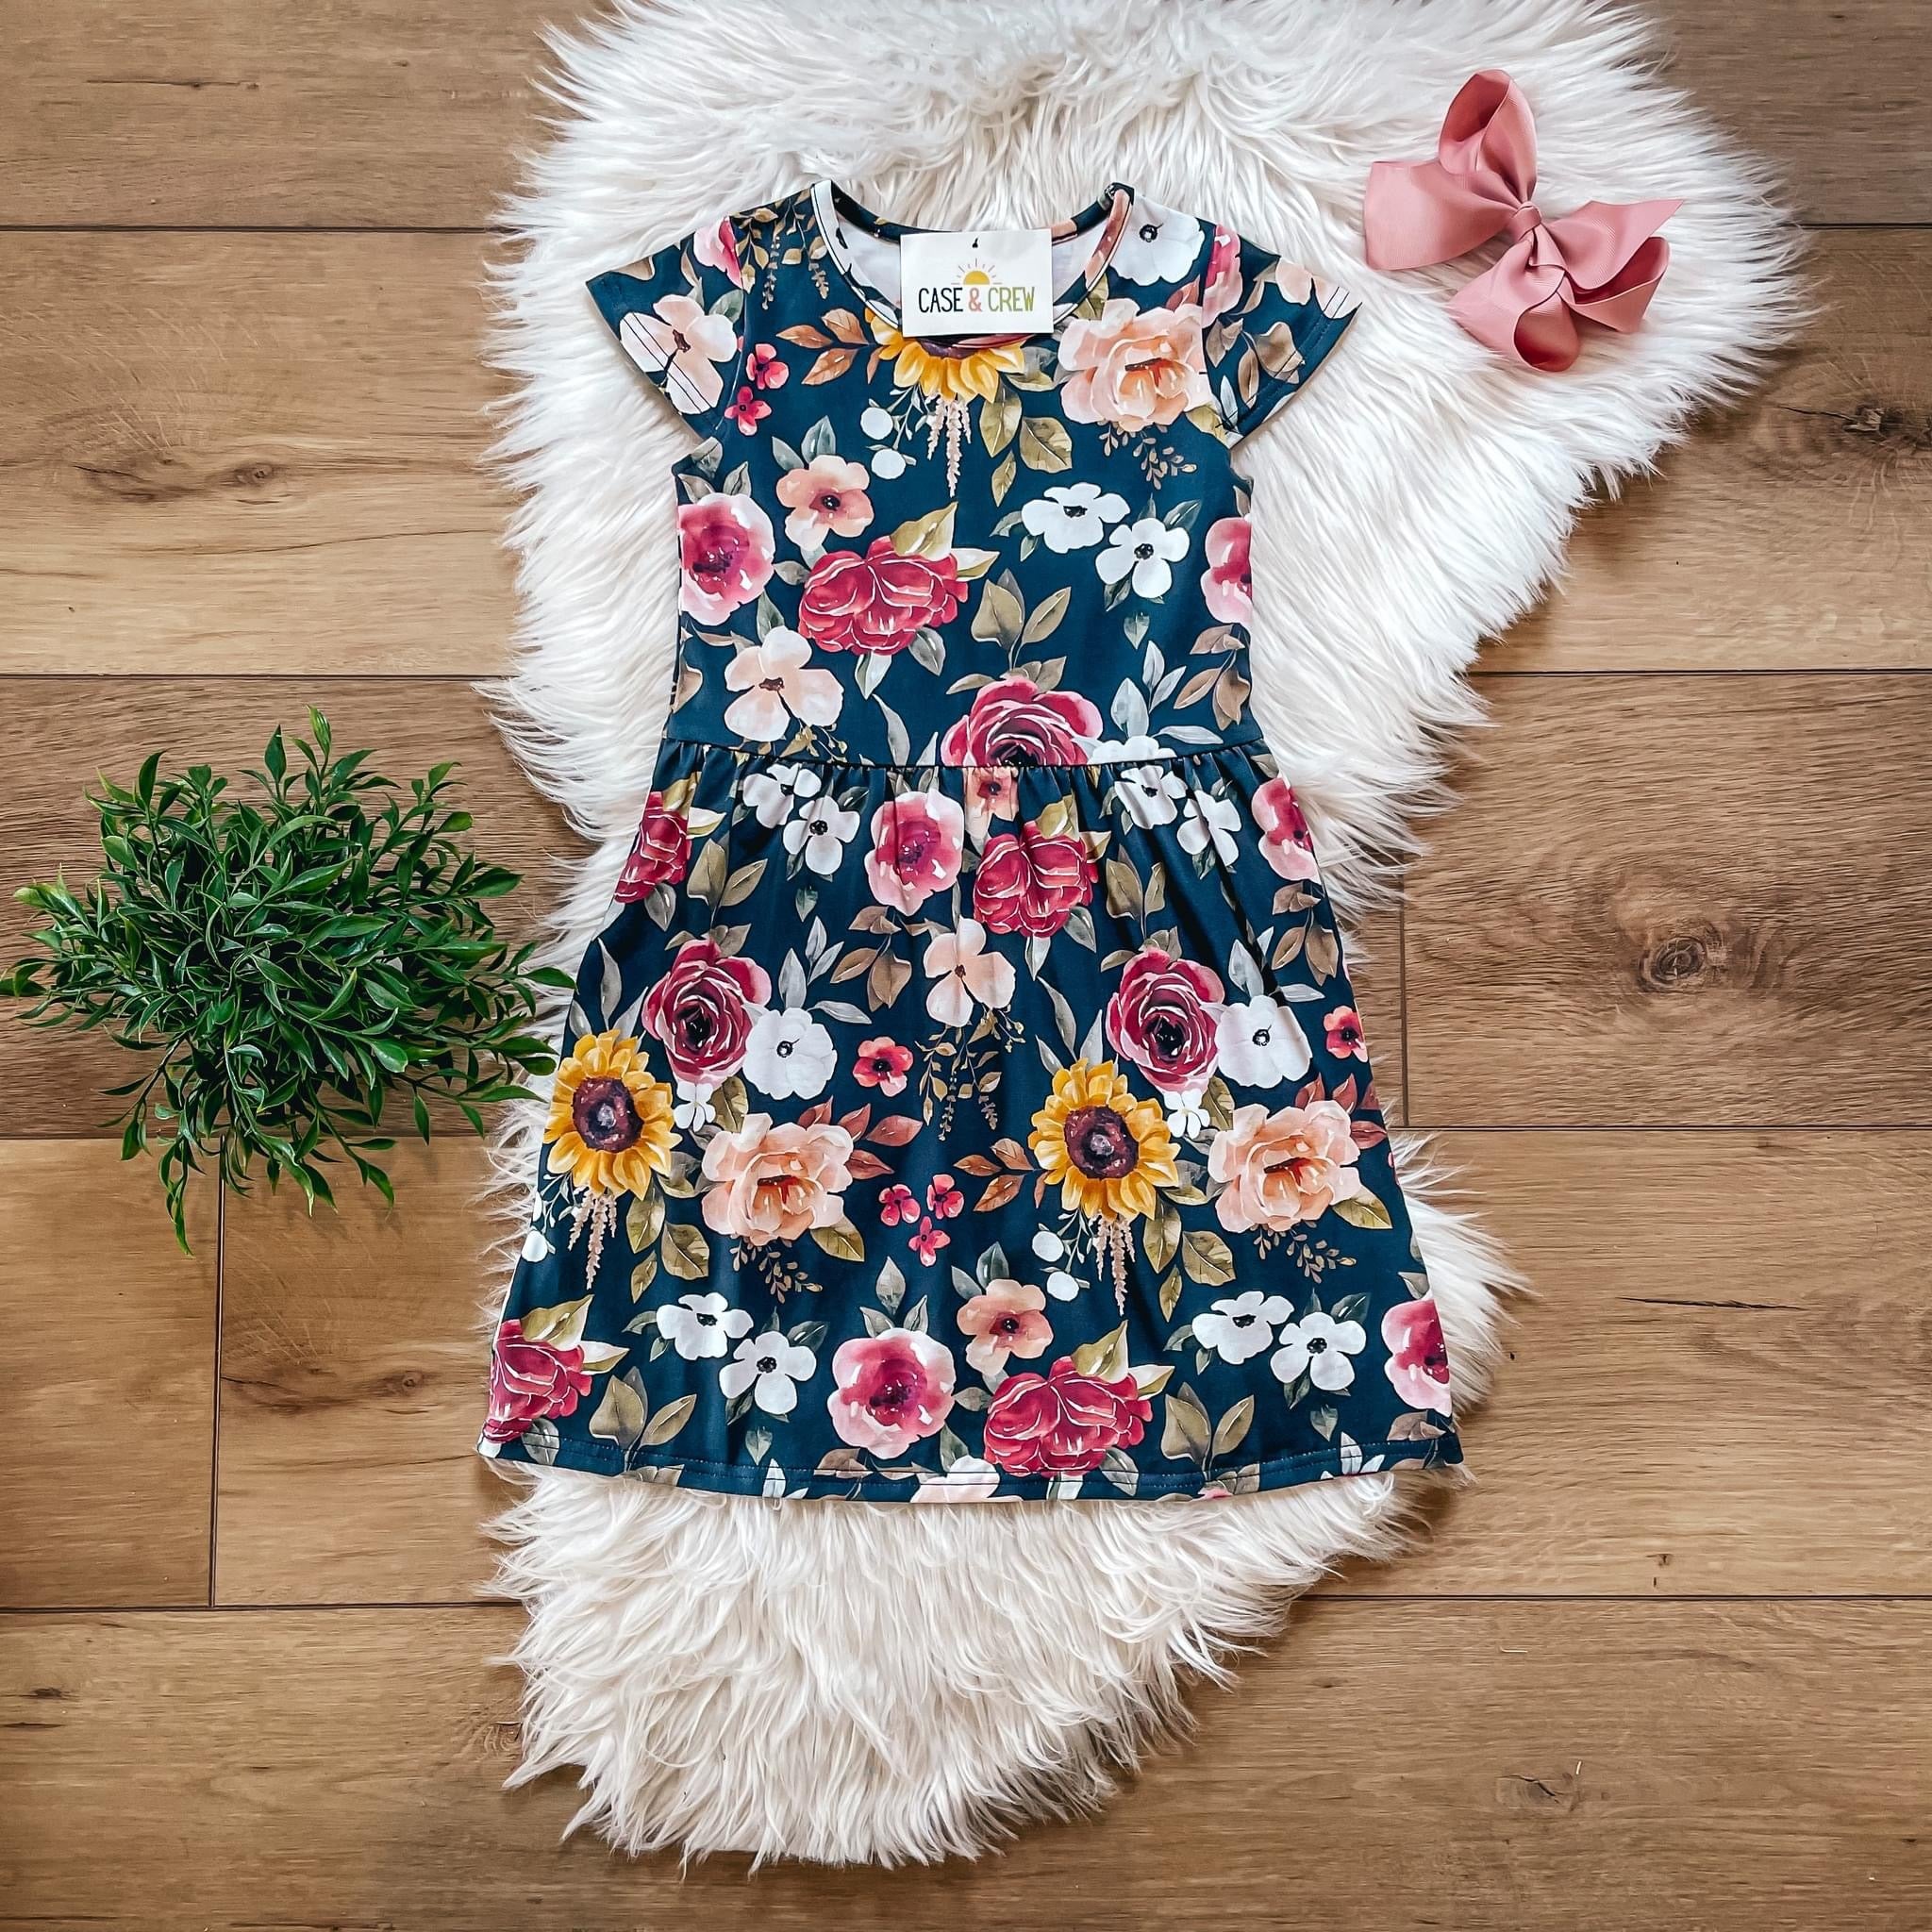 Floral Dress by Case & Crew